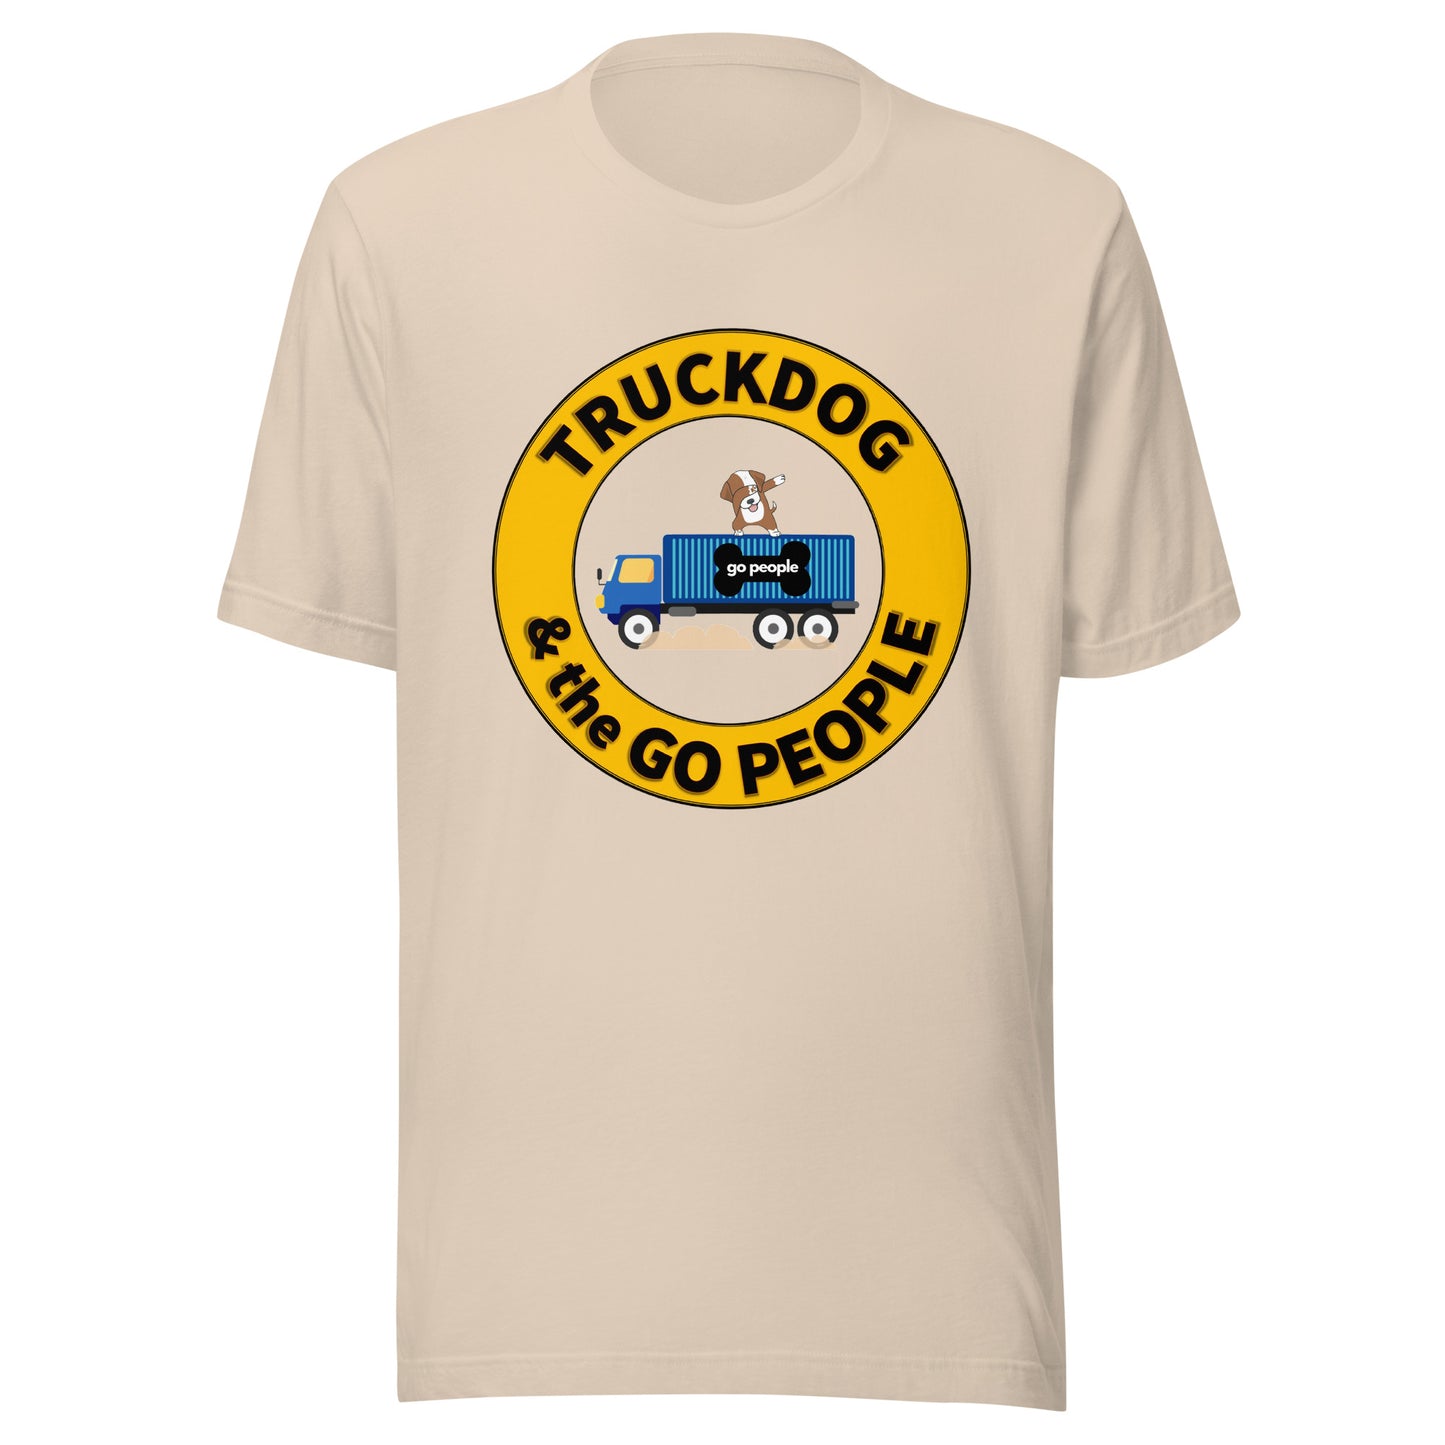 TruckDog & The Go People Classic Dab T-Shirt